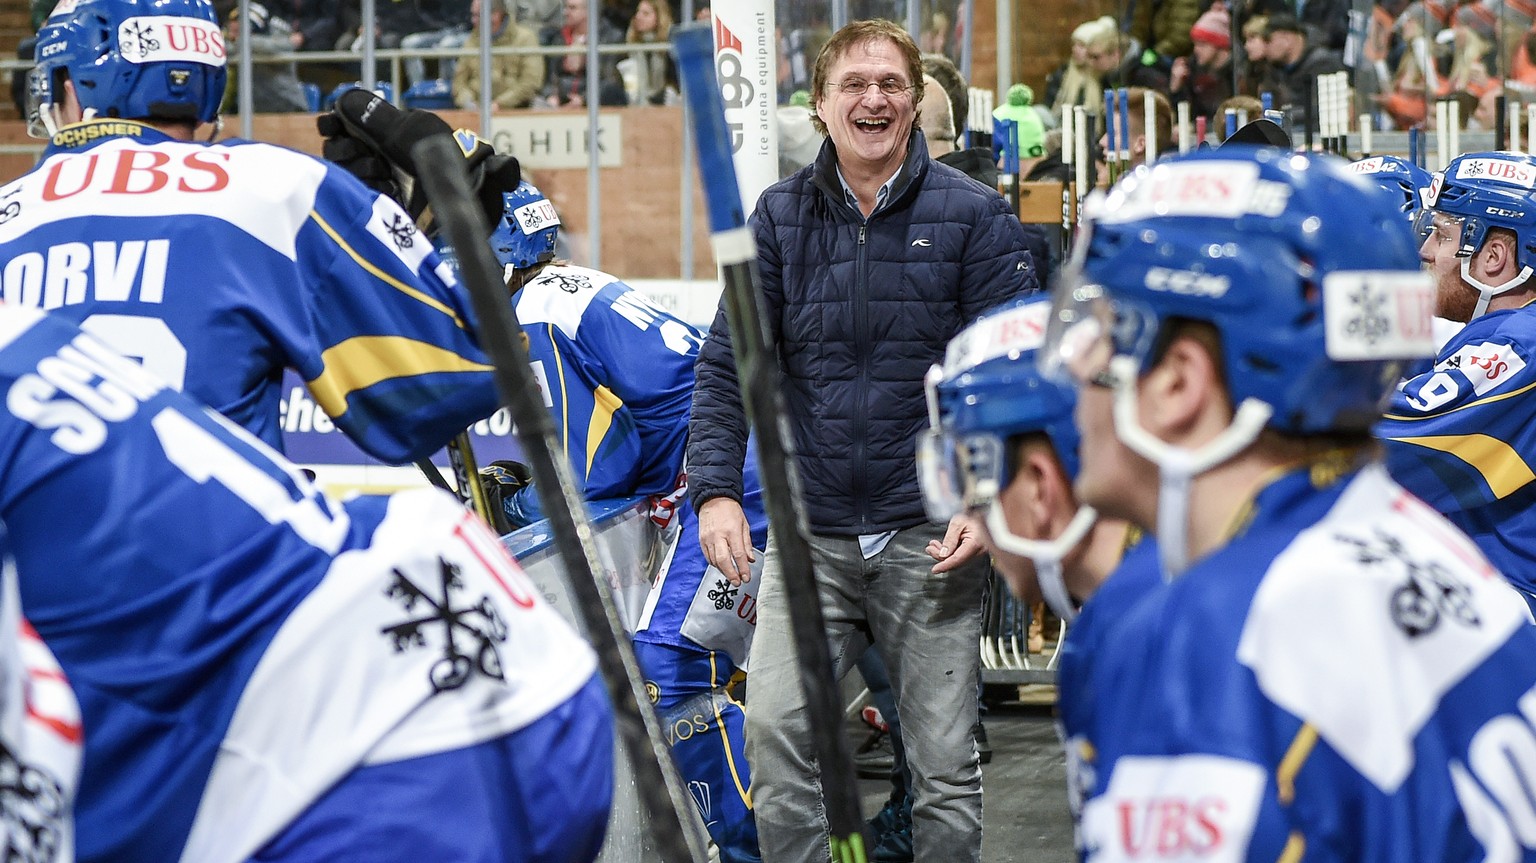 Davos`coach Arno del Curto during the game between HC Davos and Haemeenlinna PK at the 91th Spengler Cup ice hockey tournament in Davos, Switzerland, Friday, December 29, 2017. (KEYSTONE/Melanie Duche ...